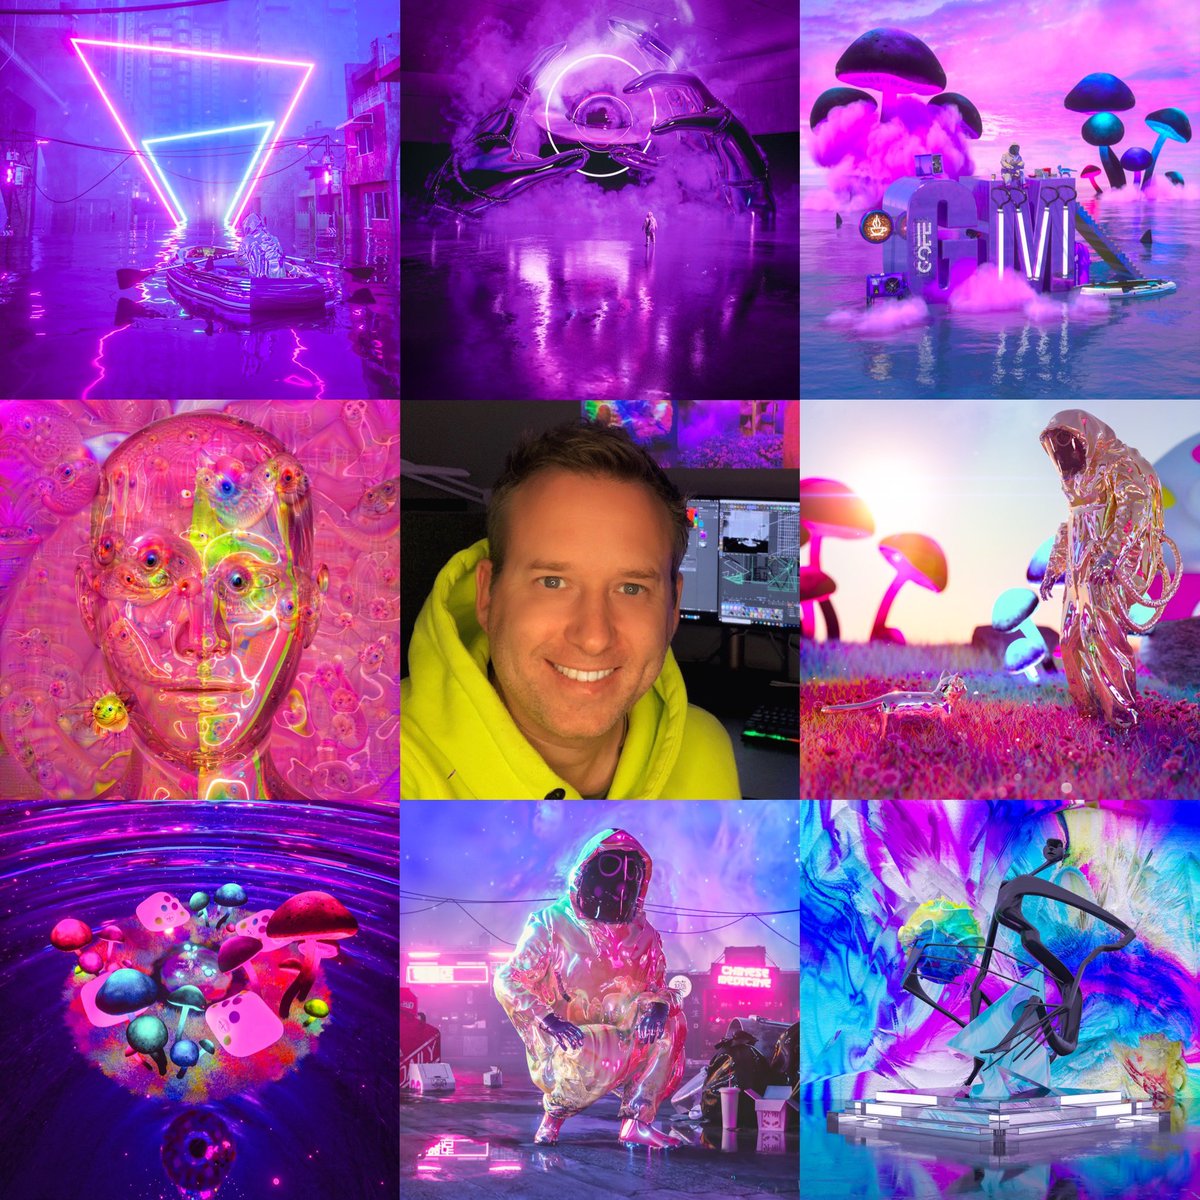 I’m Ant from @qfilmstv 
My obsession of colour, light and abstract art enables me to create fantasy stories with #crazyhank being the link between my crazy brain and the world. 🙏😛🌈🚀
#TheArtVsTheArtist